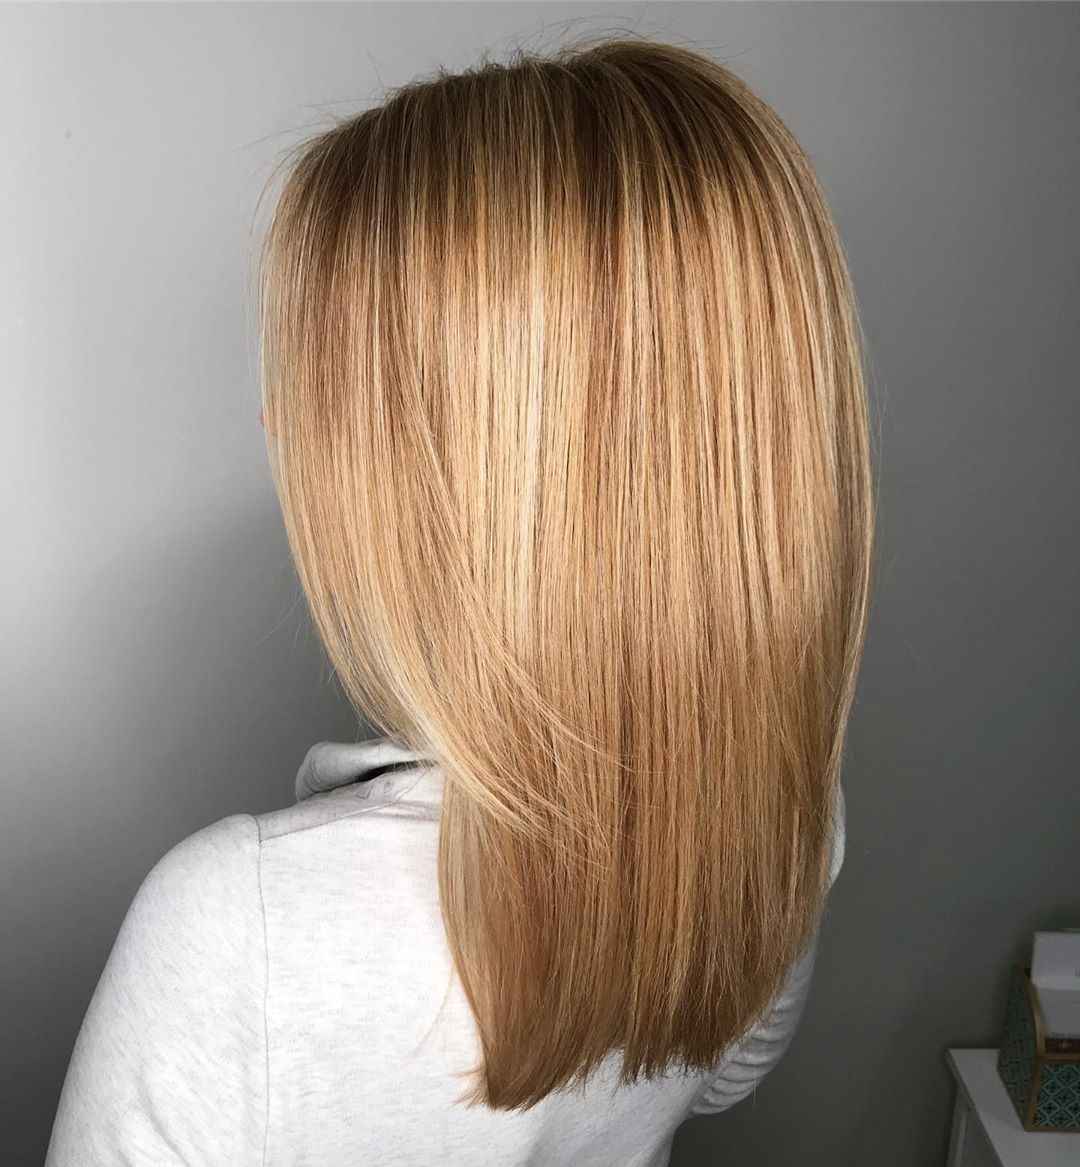 Light Golden Brown Hair Color: How It Looks & 15 Fashion Ideas